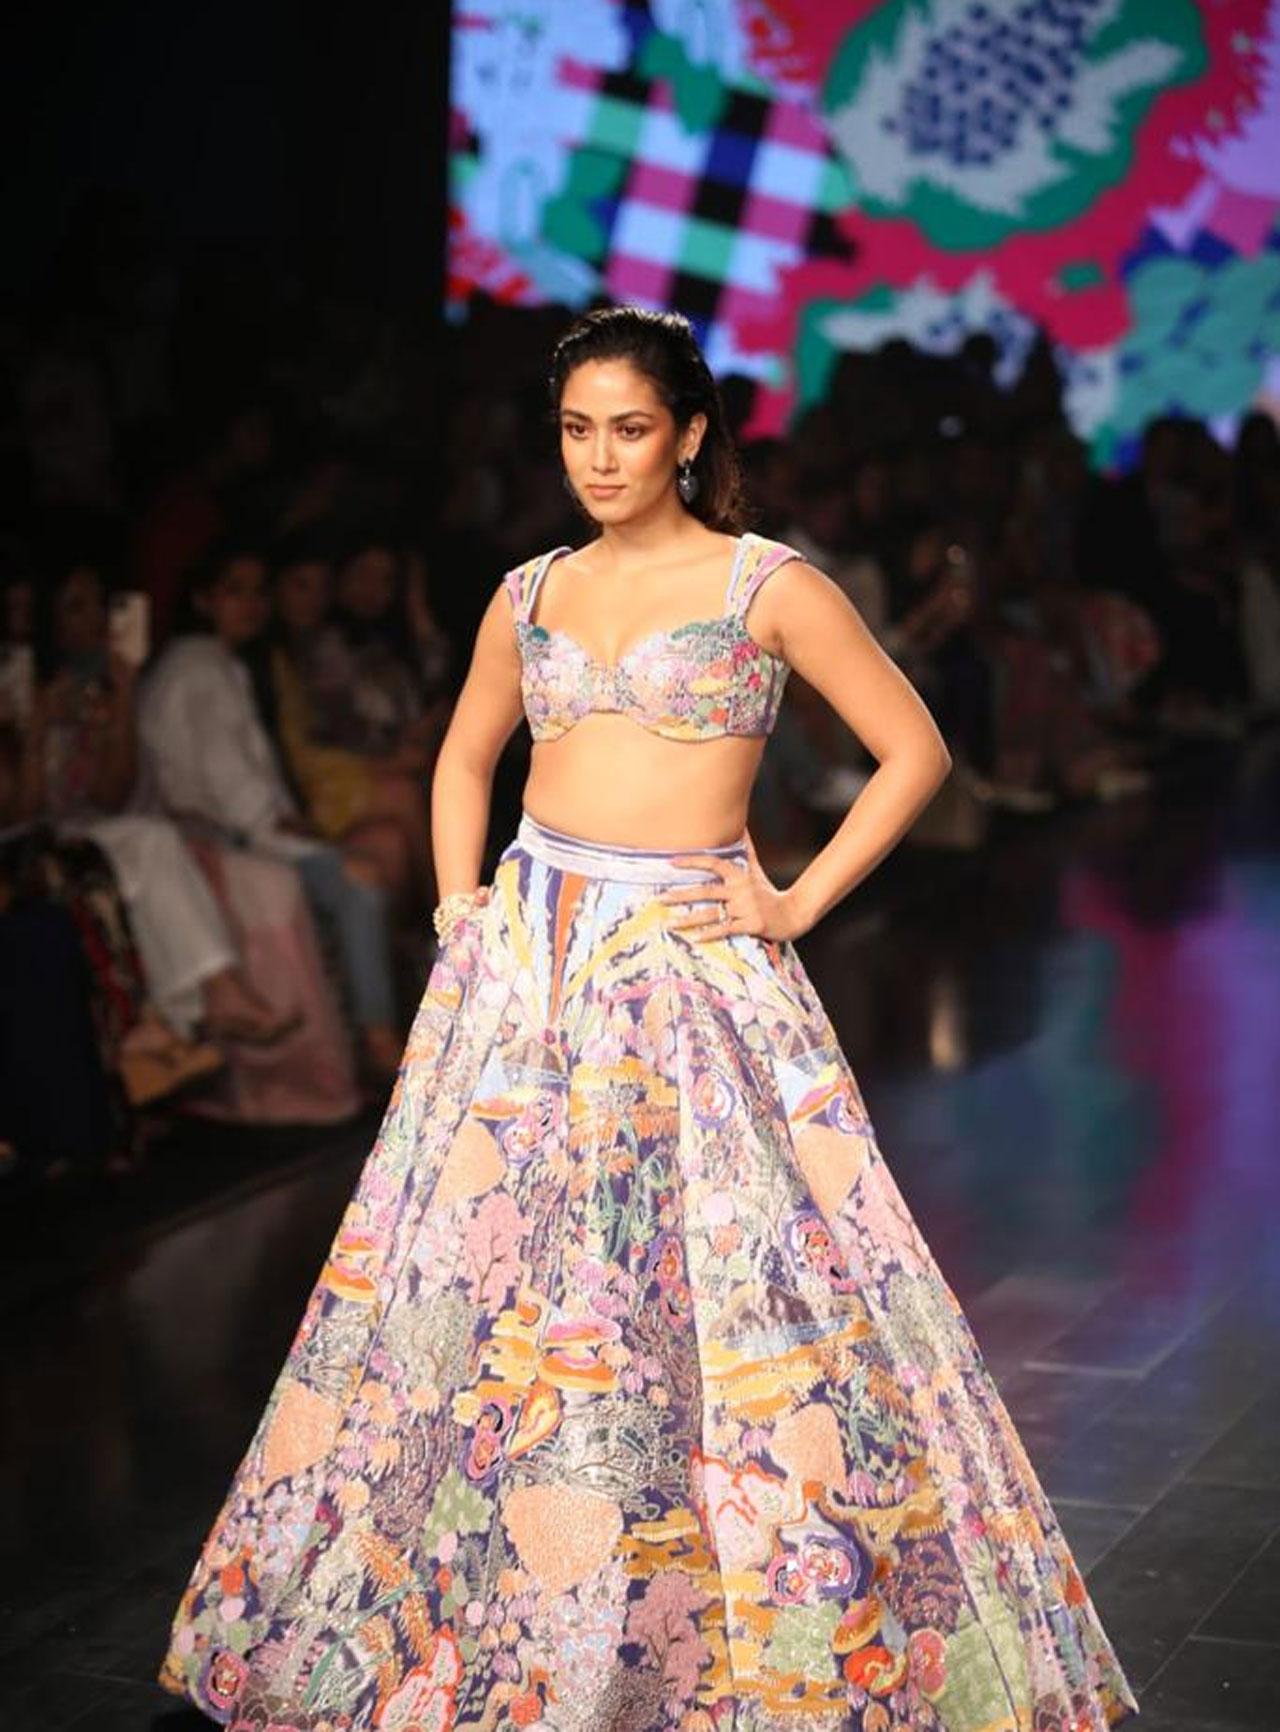 Who better than Influencer Mira Rajput to talk about the difference between Delhi and Mumbai fashion. 